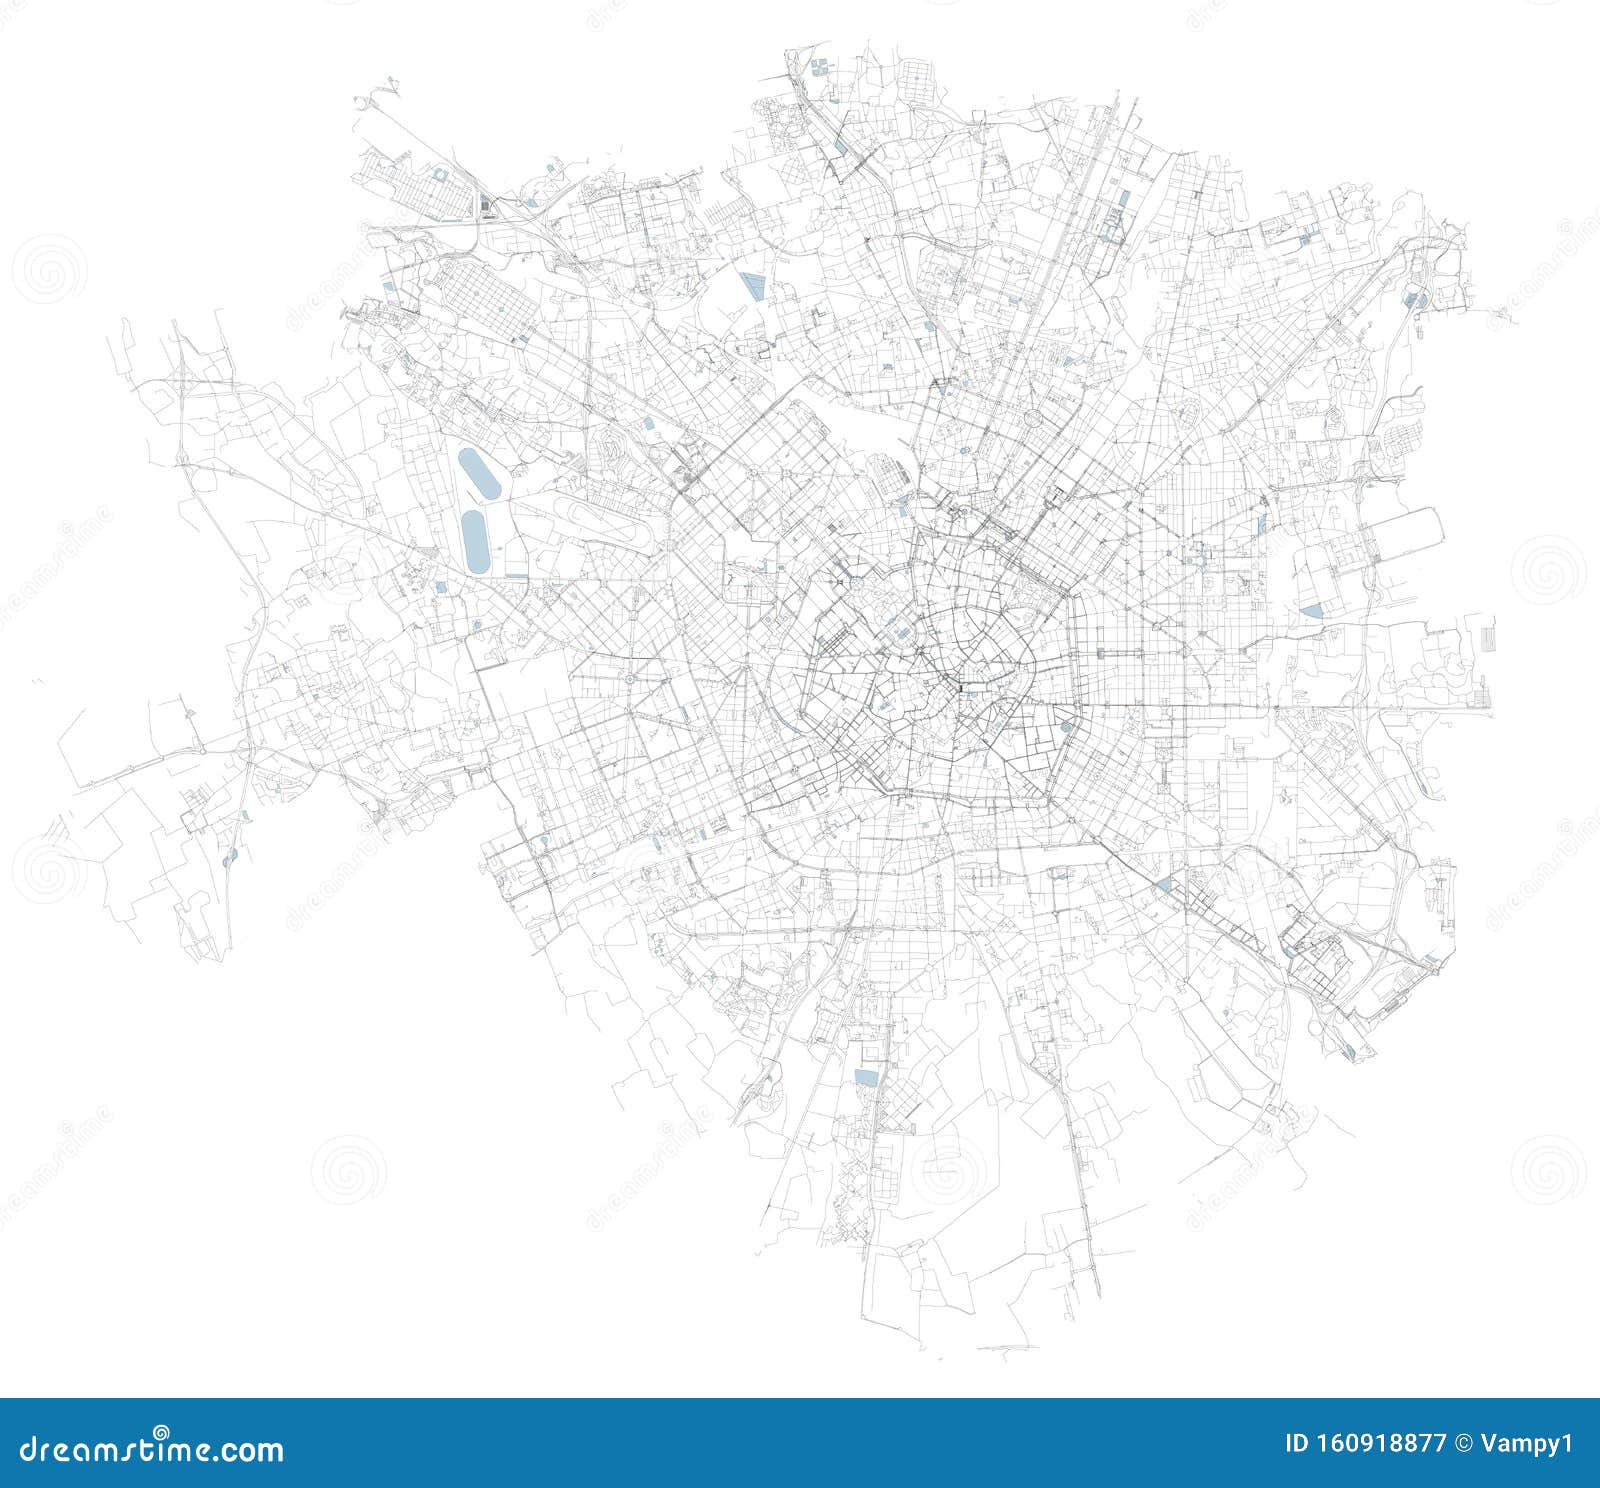 satellite map of milan, zones and municipalities. streets. lombardy. italy